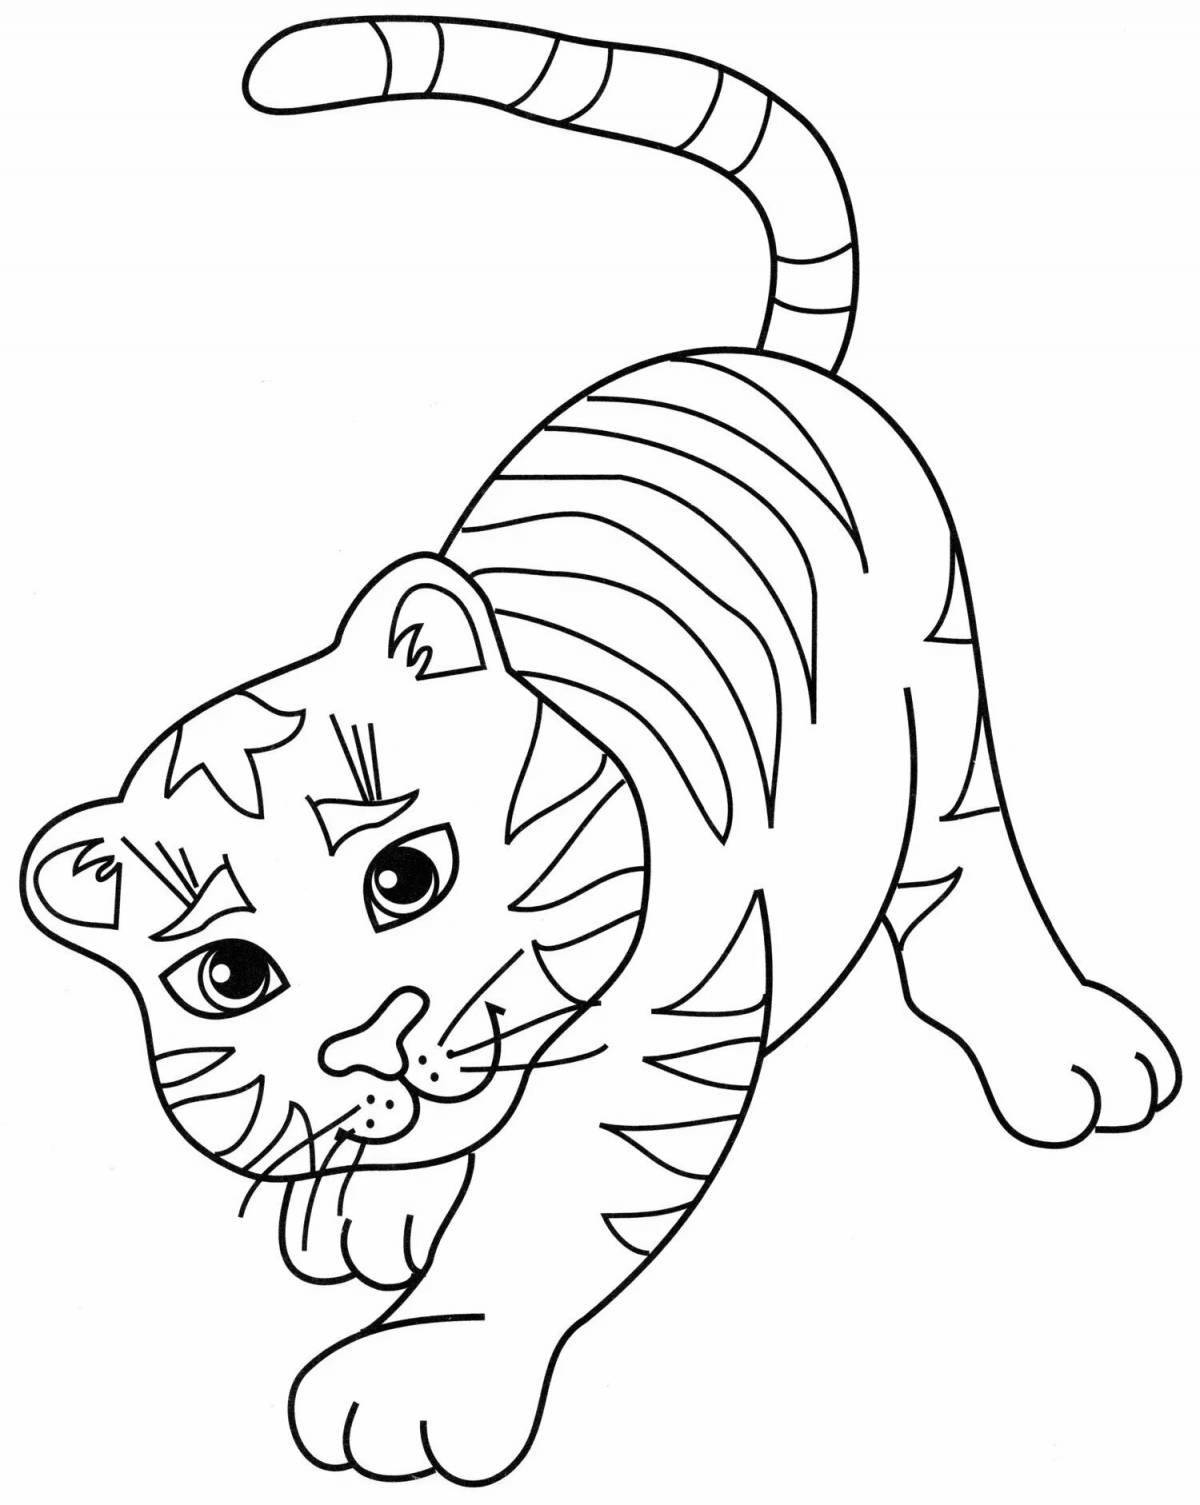 Adorable tiger coloring book for kids